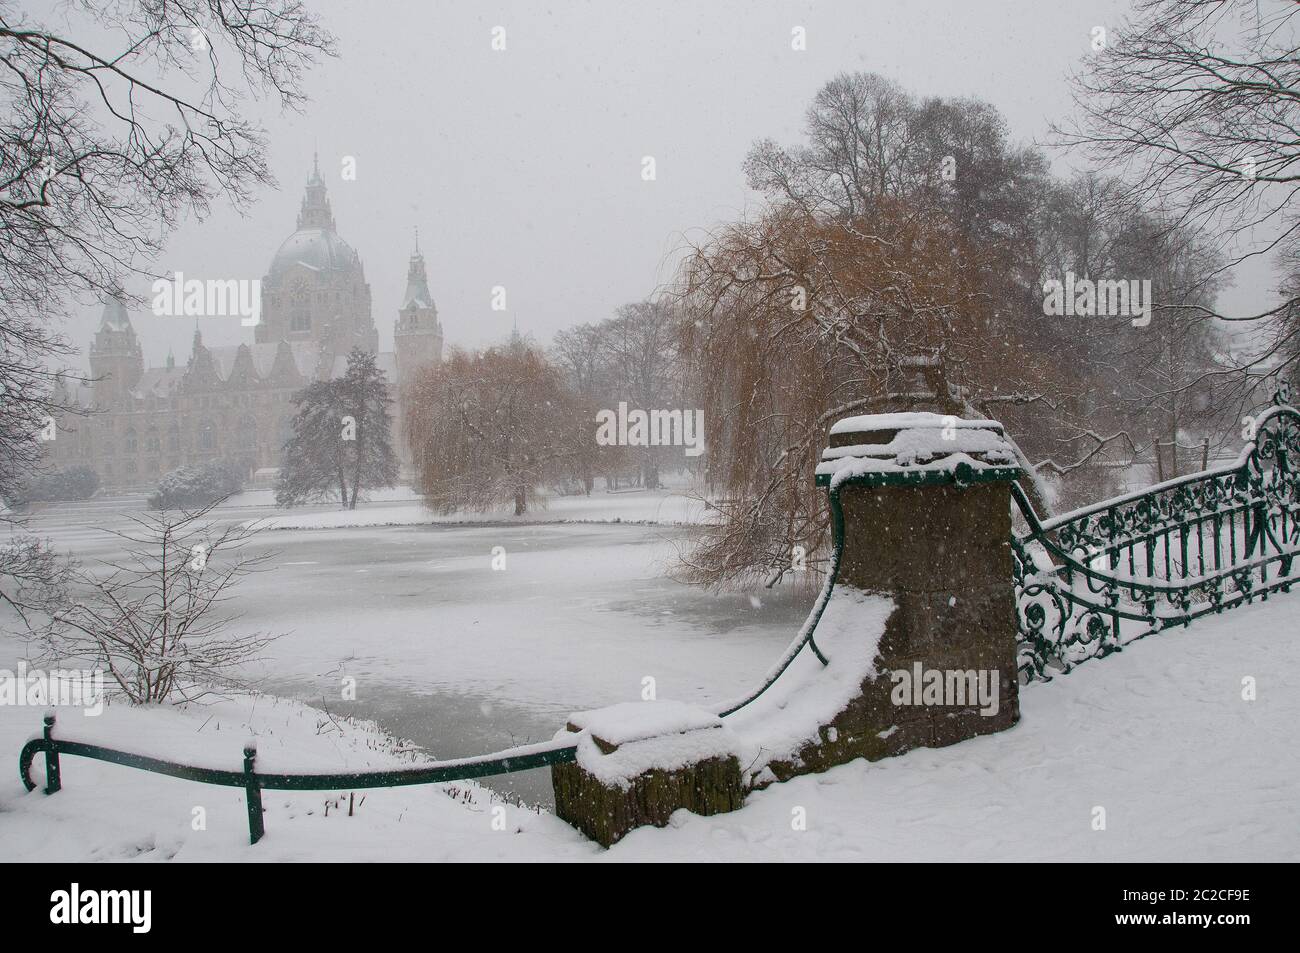 The 'Maschpark' and the New City Hall of Hannover in the winter Stock Photo